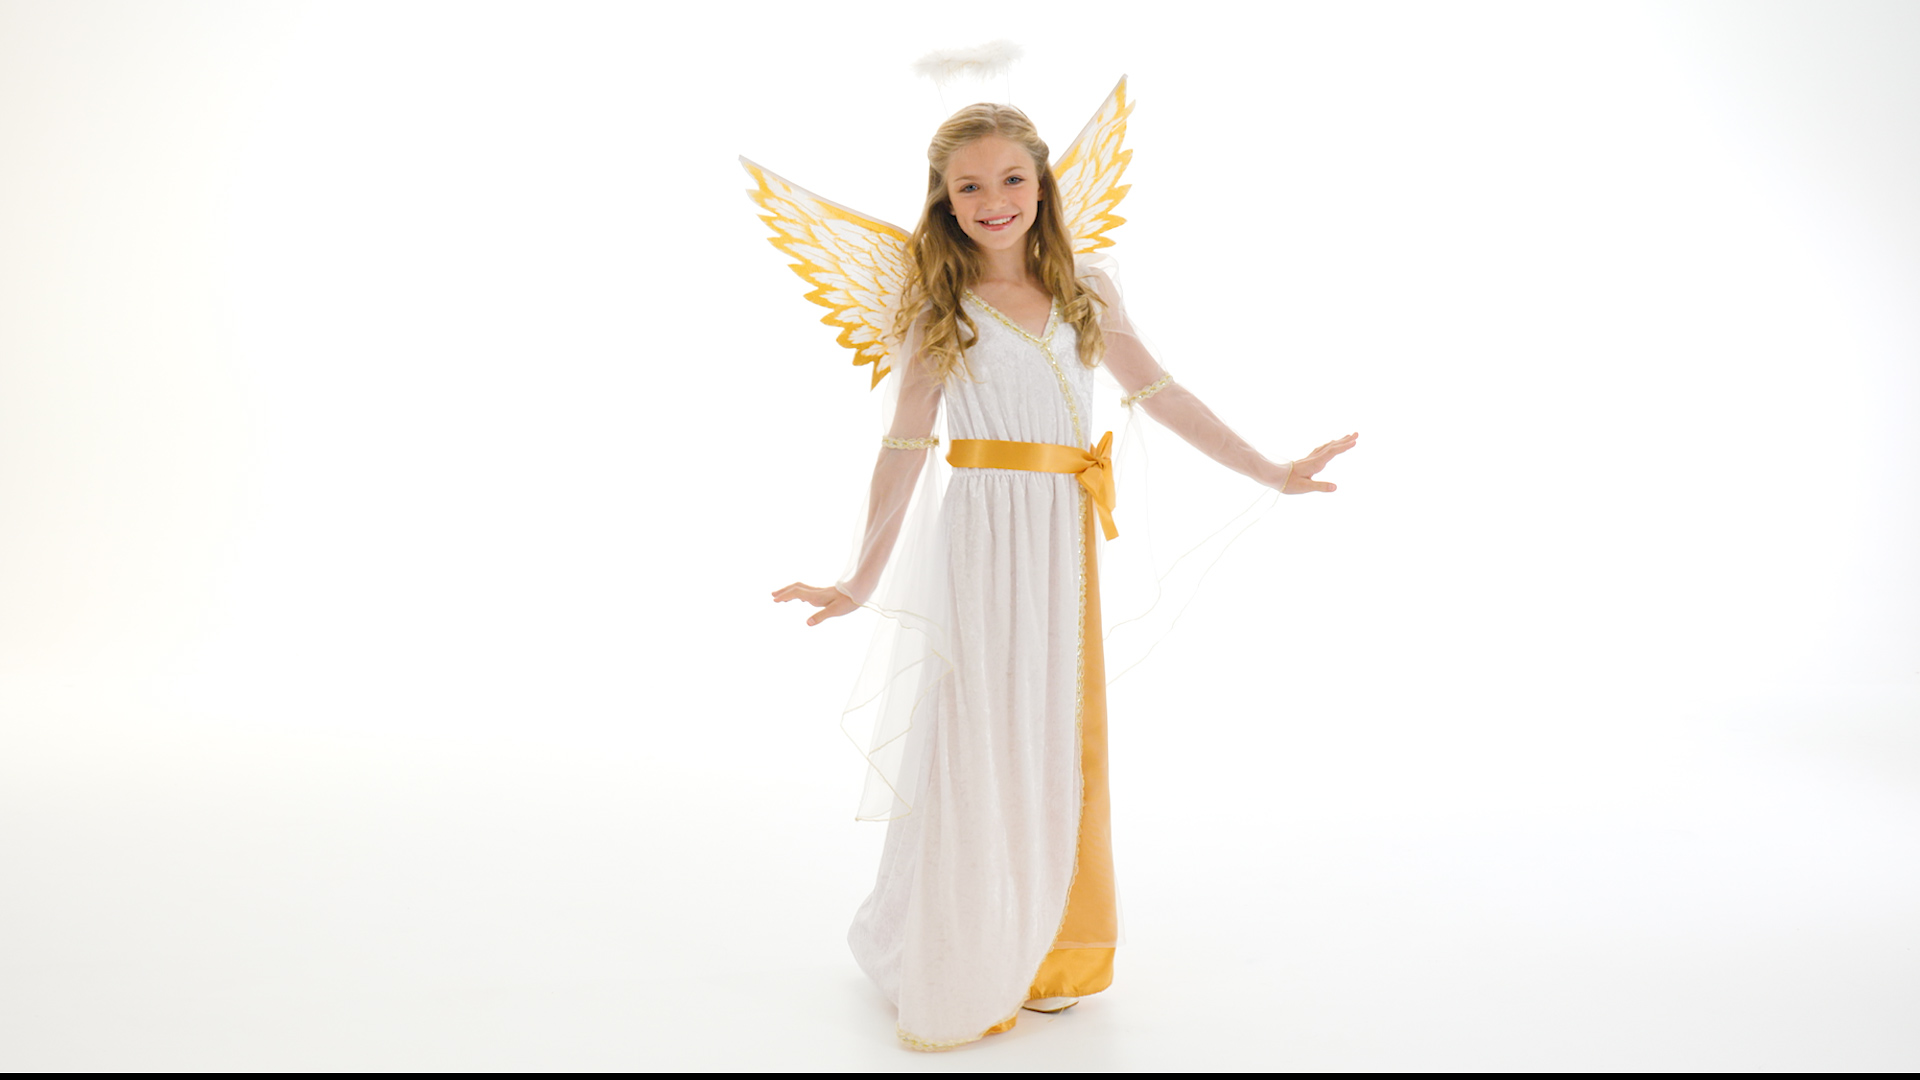 Become one of the Heavenly hosts this Christmas with our Girls Guardian Angel Costume! You'll be singing Joy to the World with gusto!